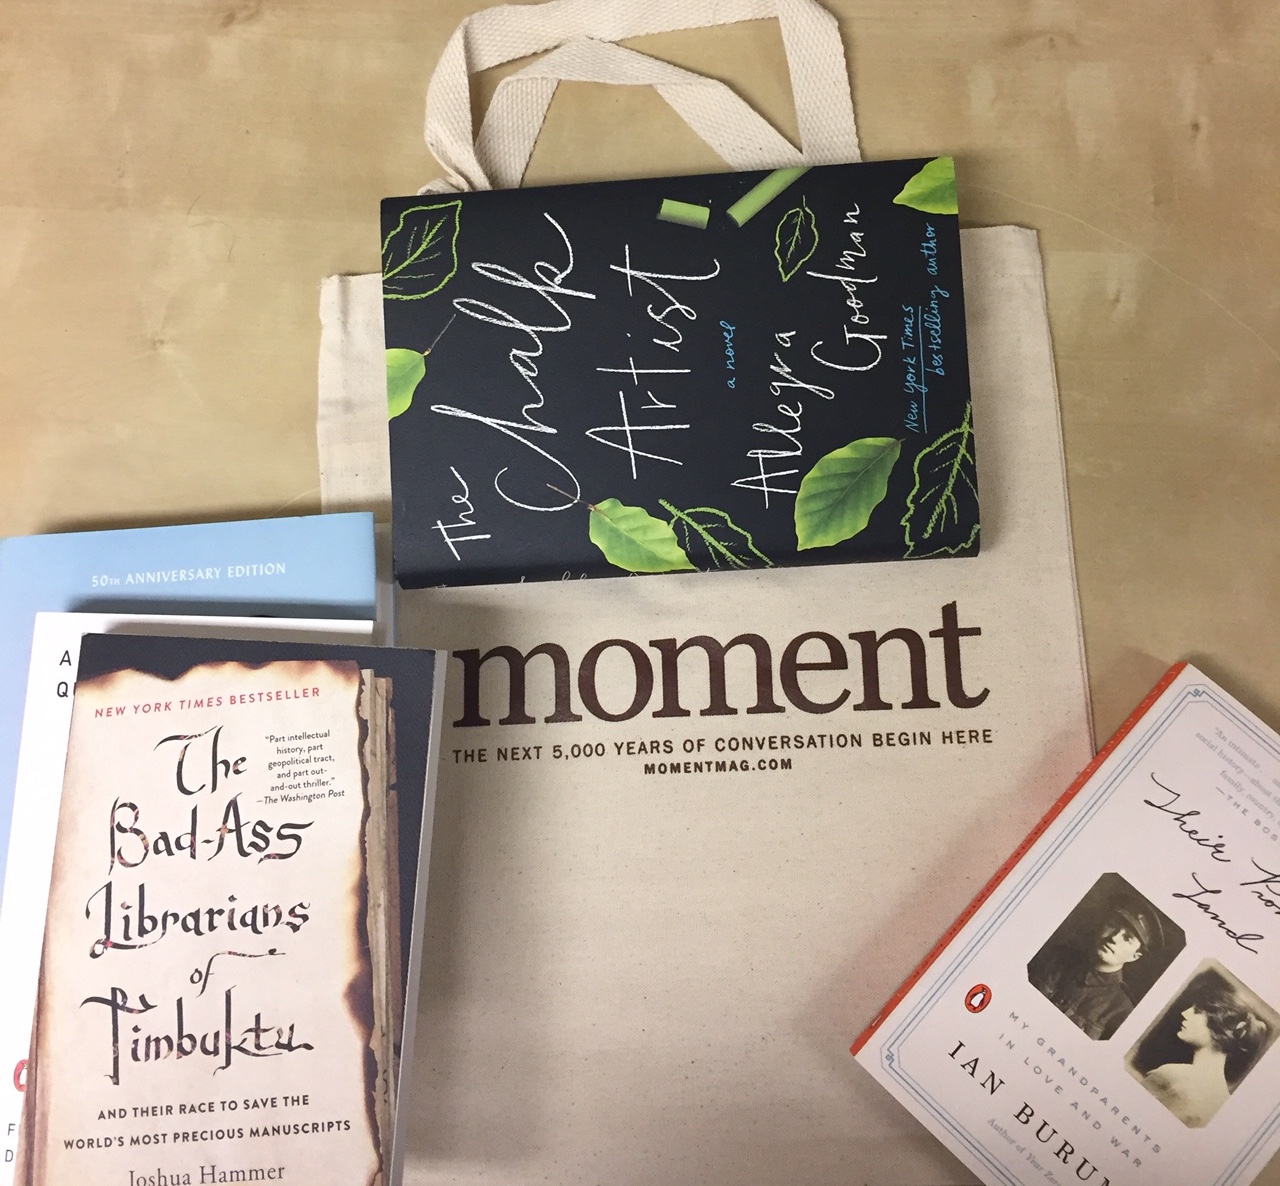 Moment tote bag and books